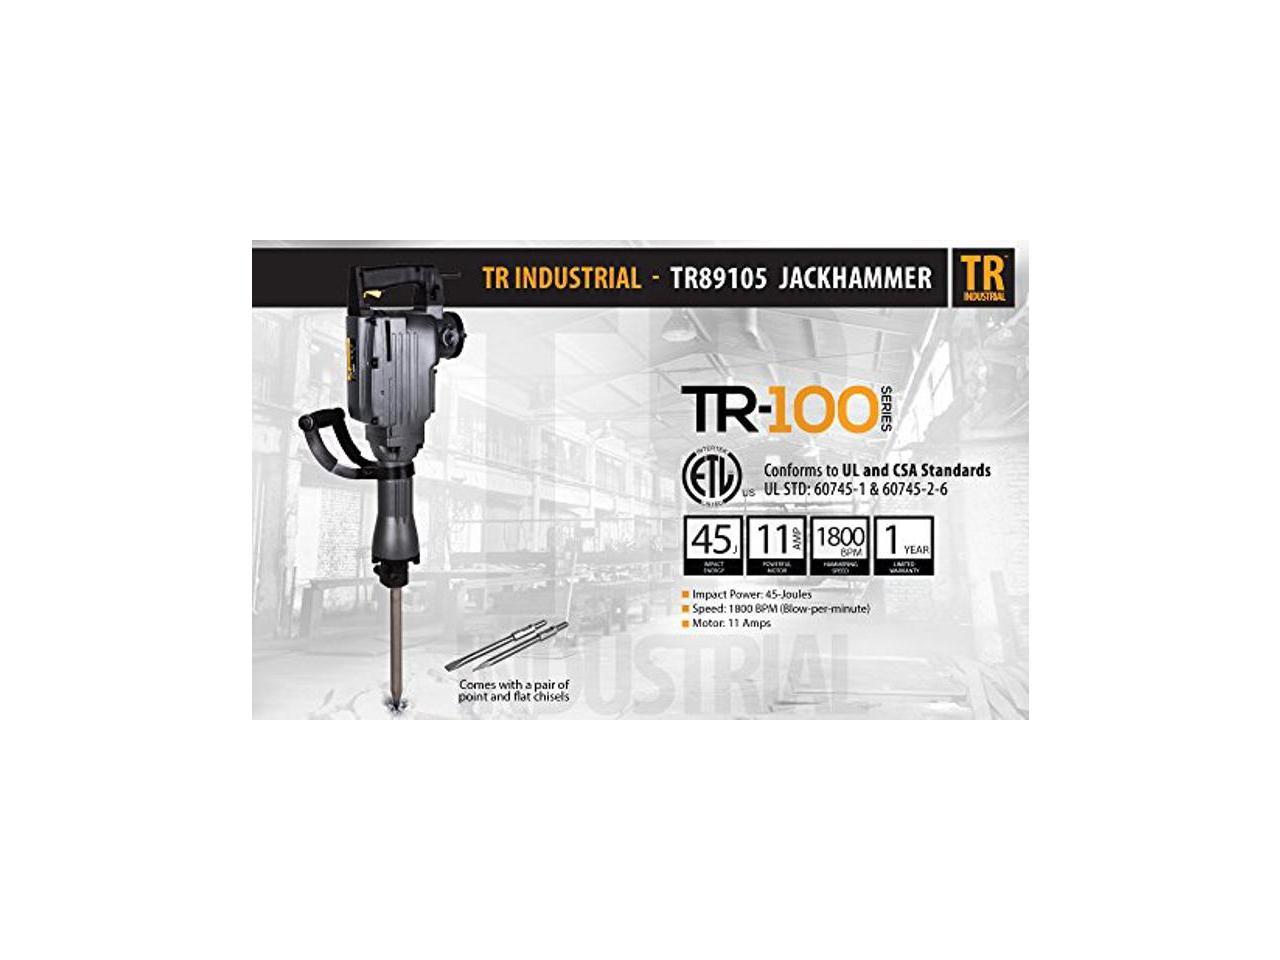 TR Industrial TR89101 Point and Flat Concrete Chisels for Electric Demolition for sale online 